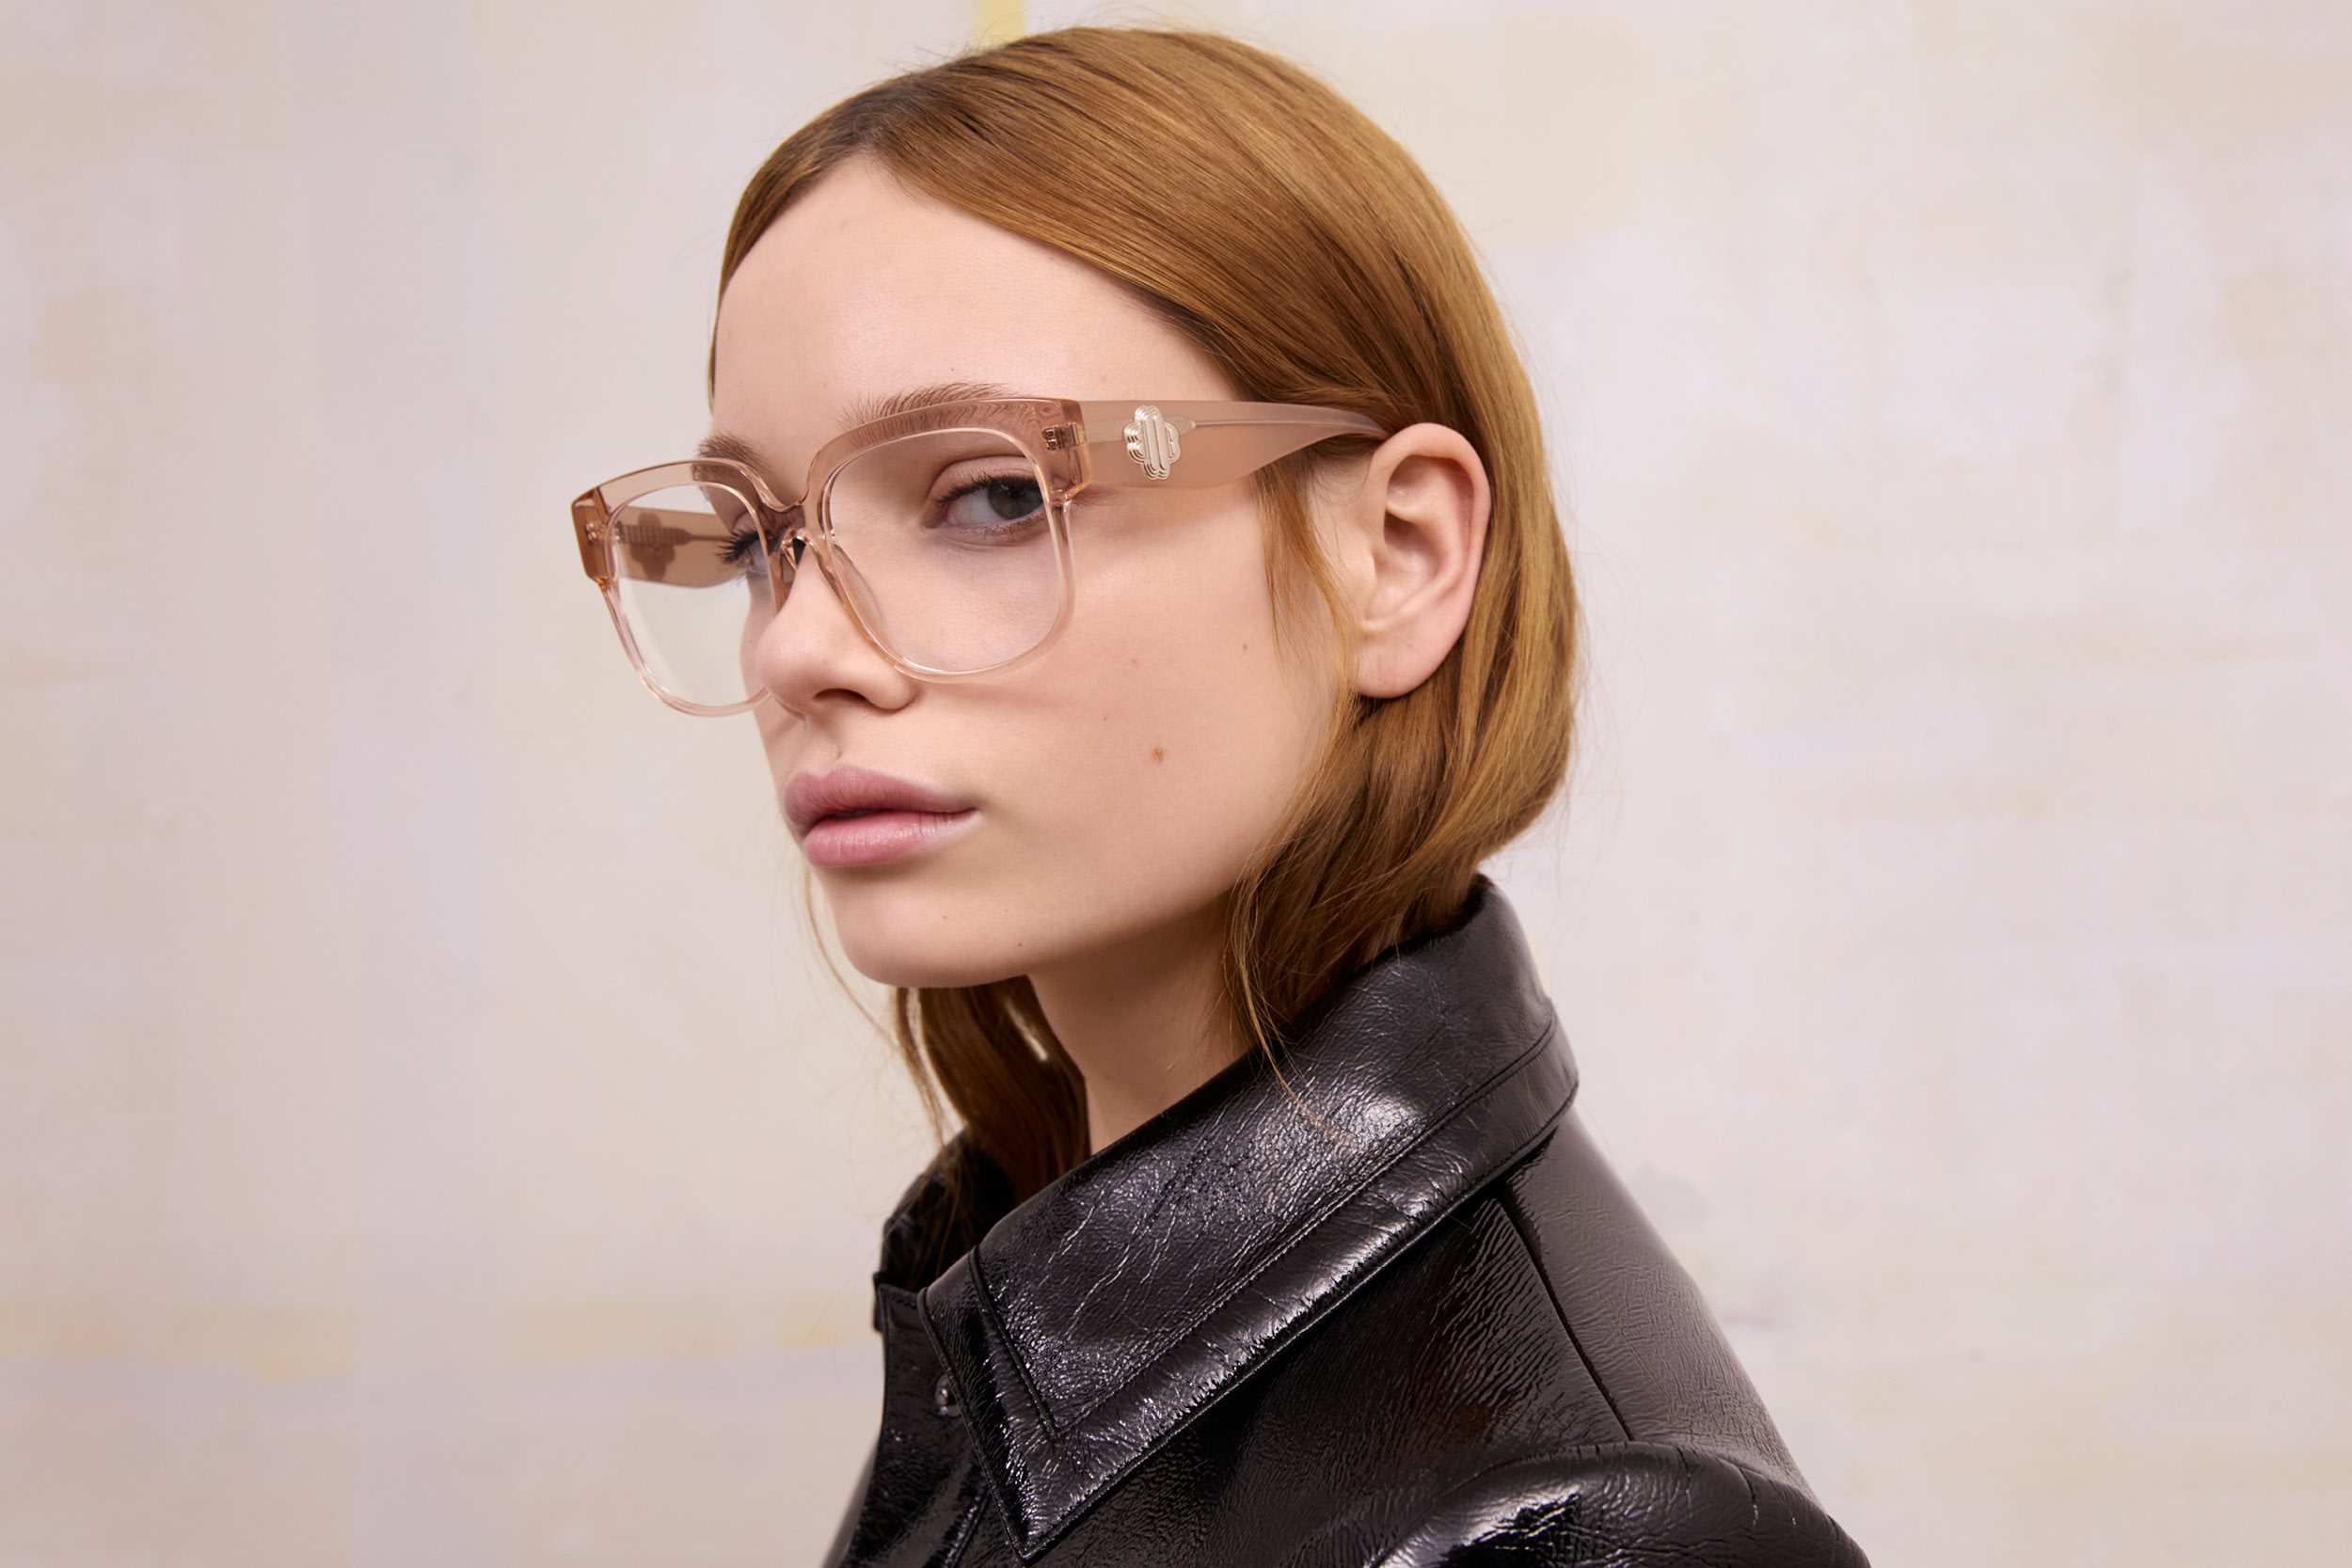 Model with glasses